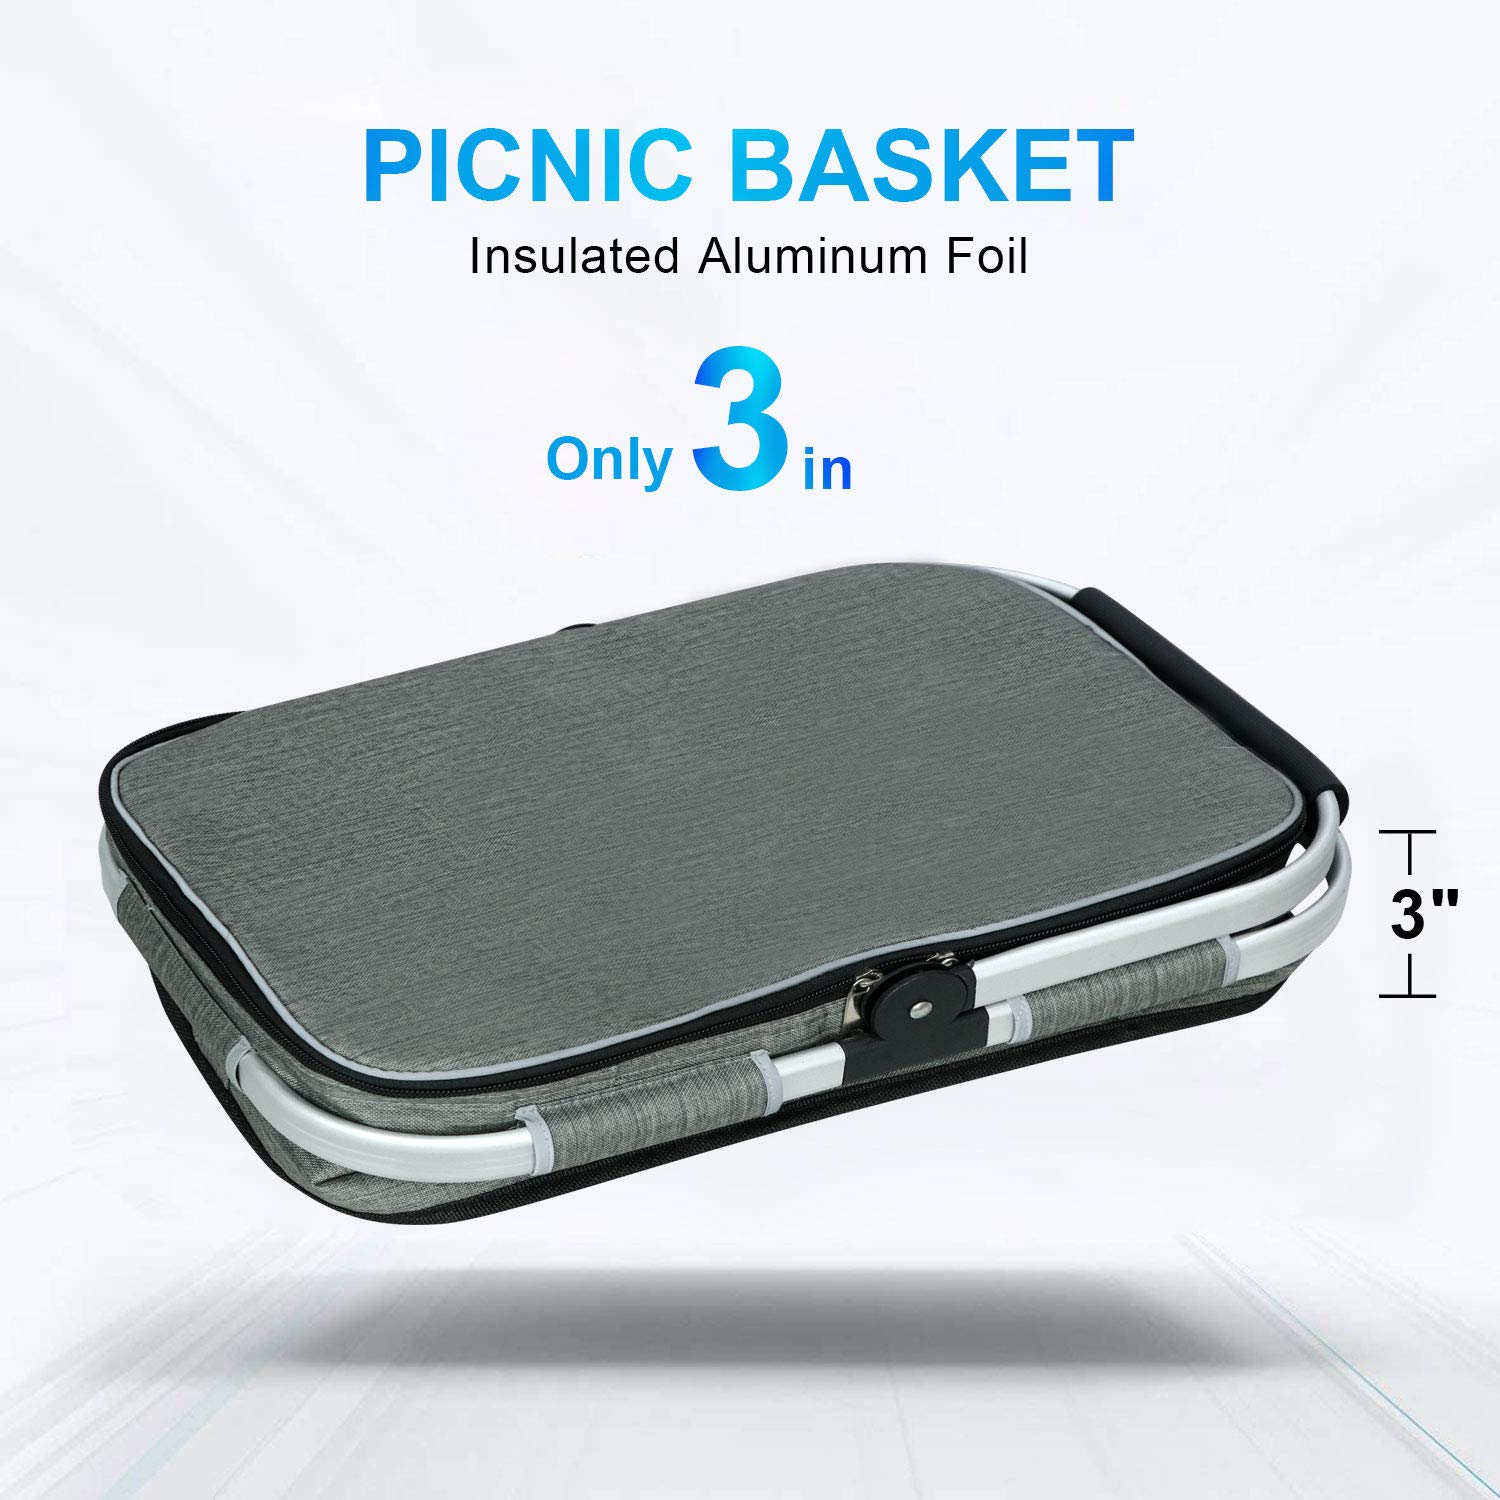 Wholesale Picnic Basket Shopping Travel Camping Grocery Bags Leak-Proof Insulated Folding thermal can beer cooler basket bag